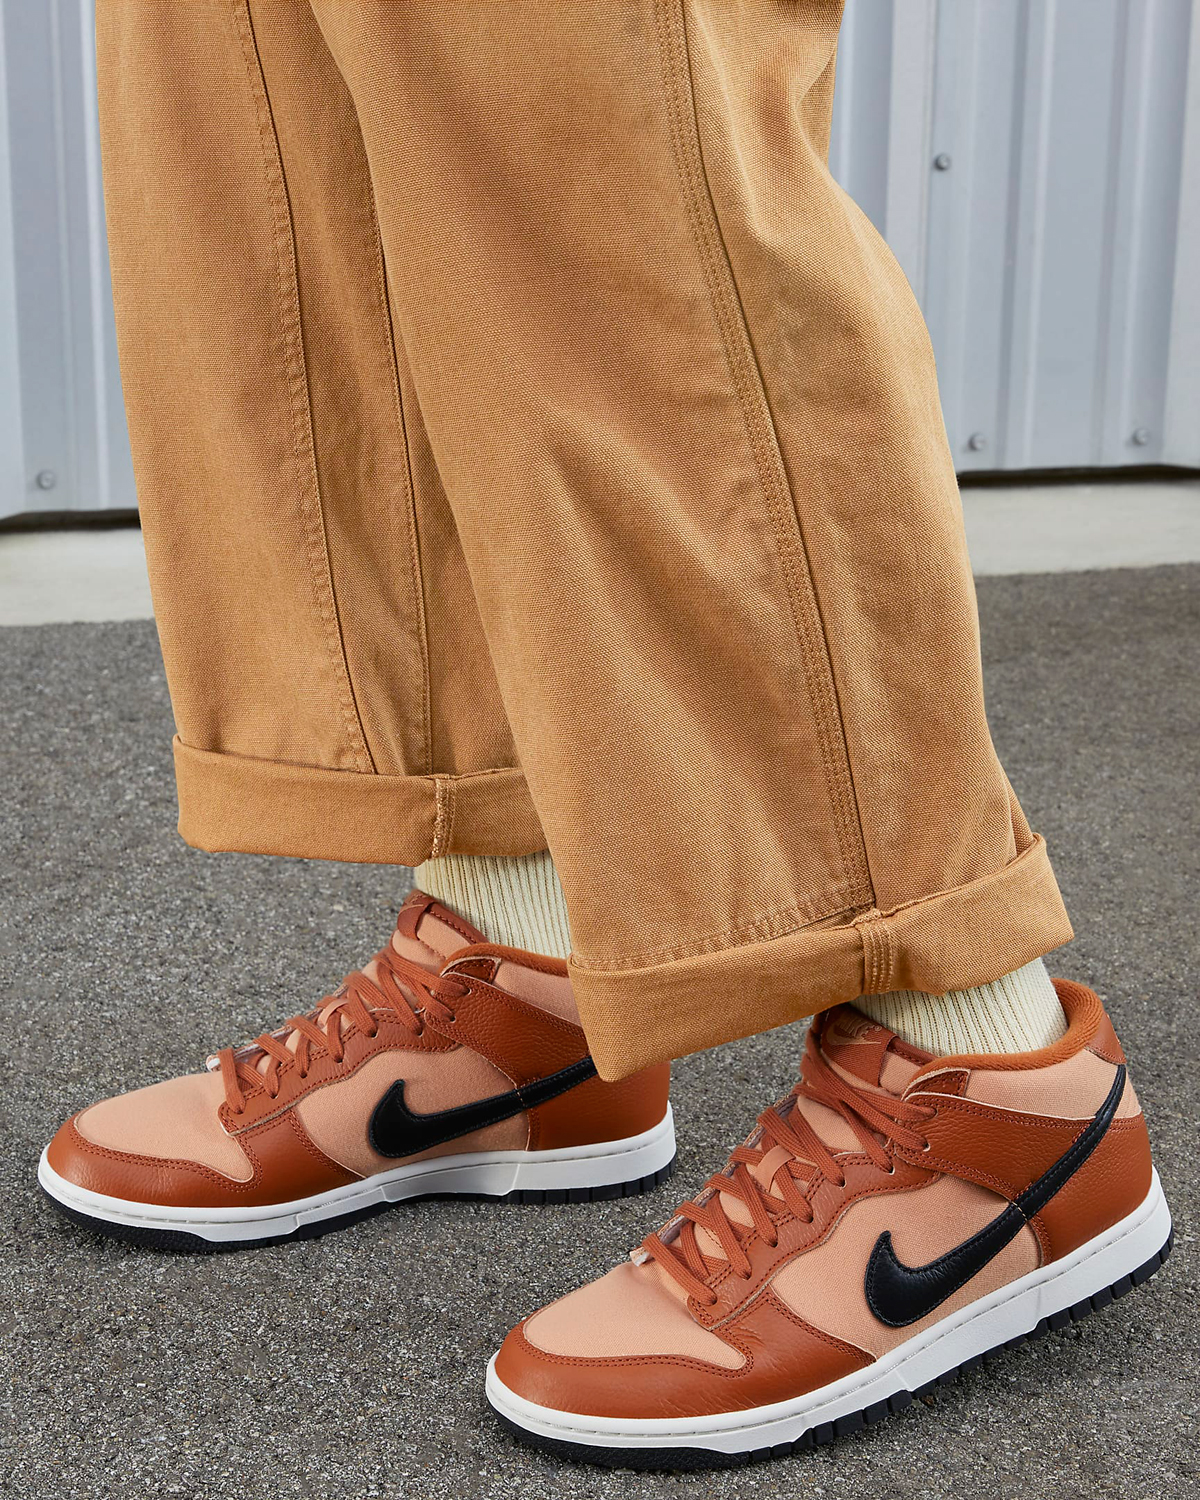 Nike-Dunk-Mid-Amber-Brown-9